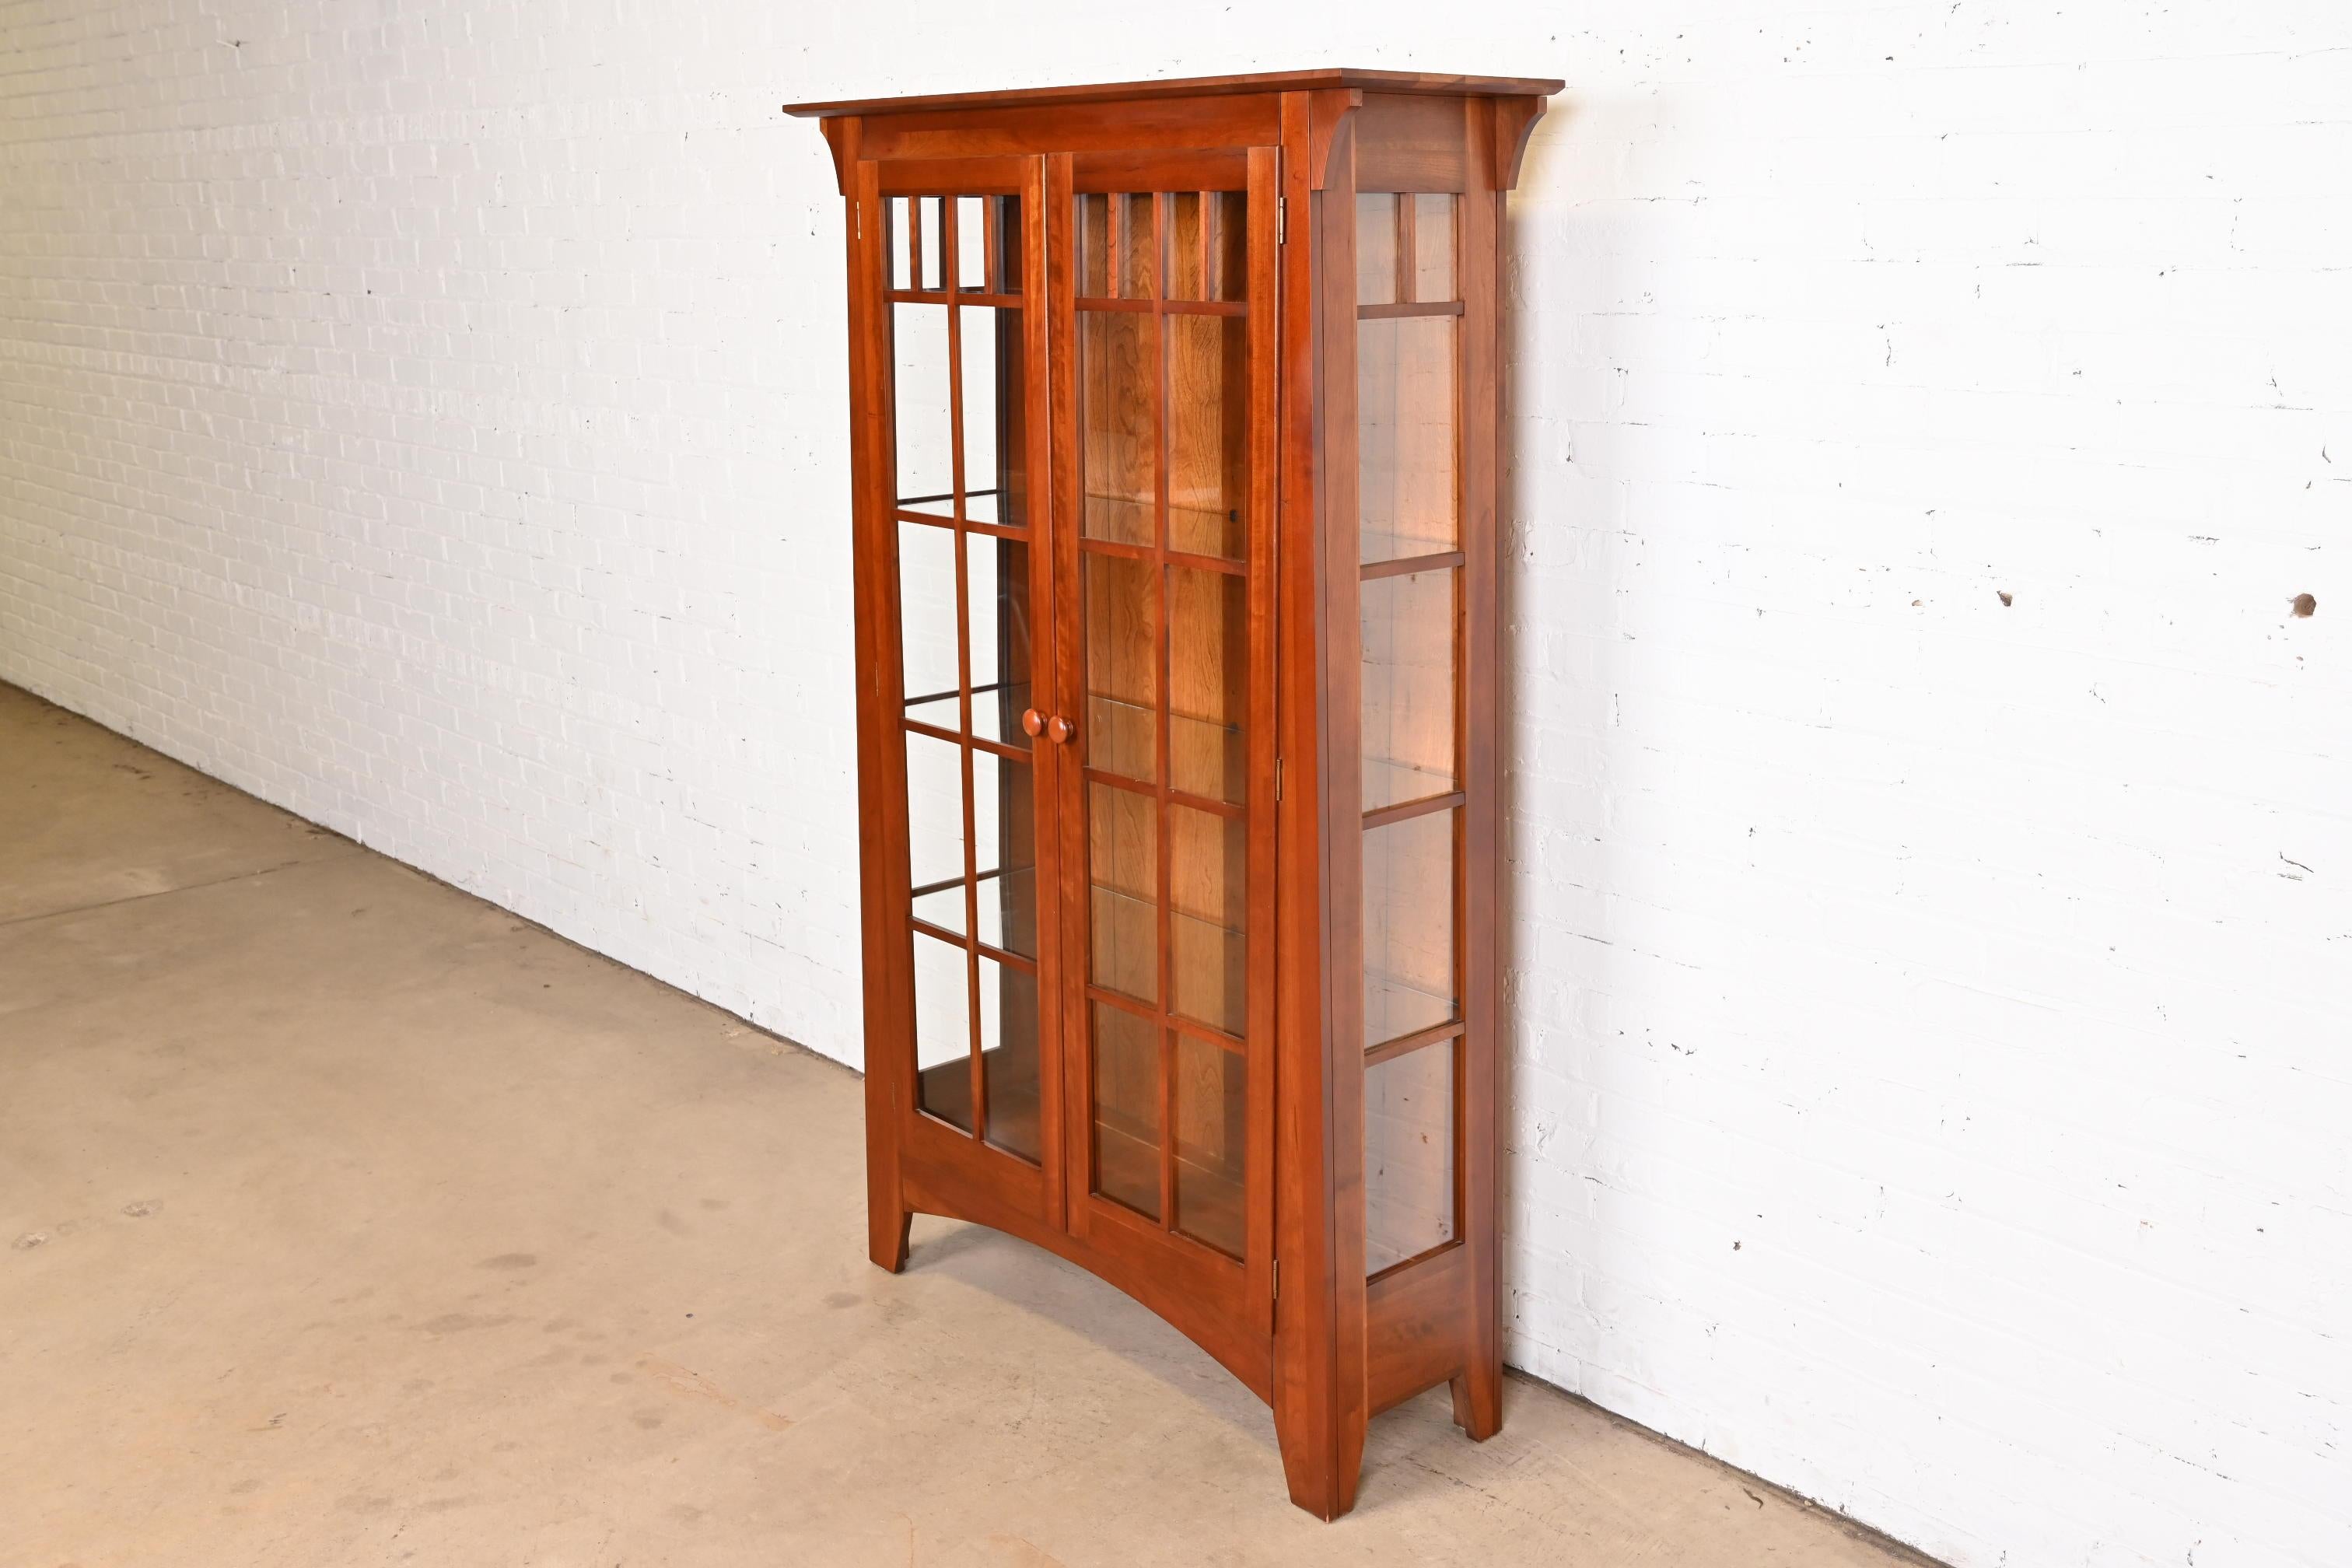 Arts and Crafts Stickley Style Arts & Crafts Cherry Wood Lighted Bookcase or Display Cabinet